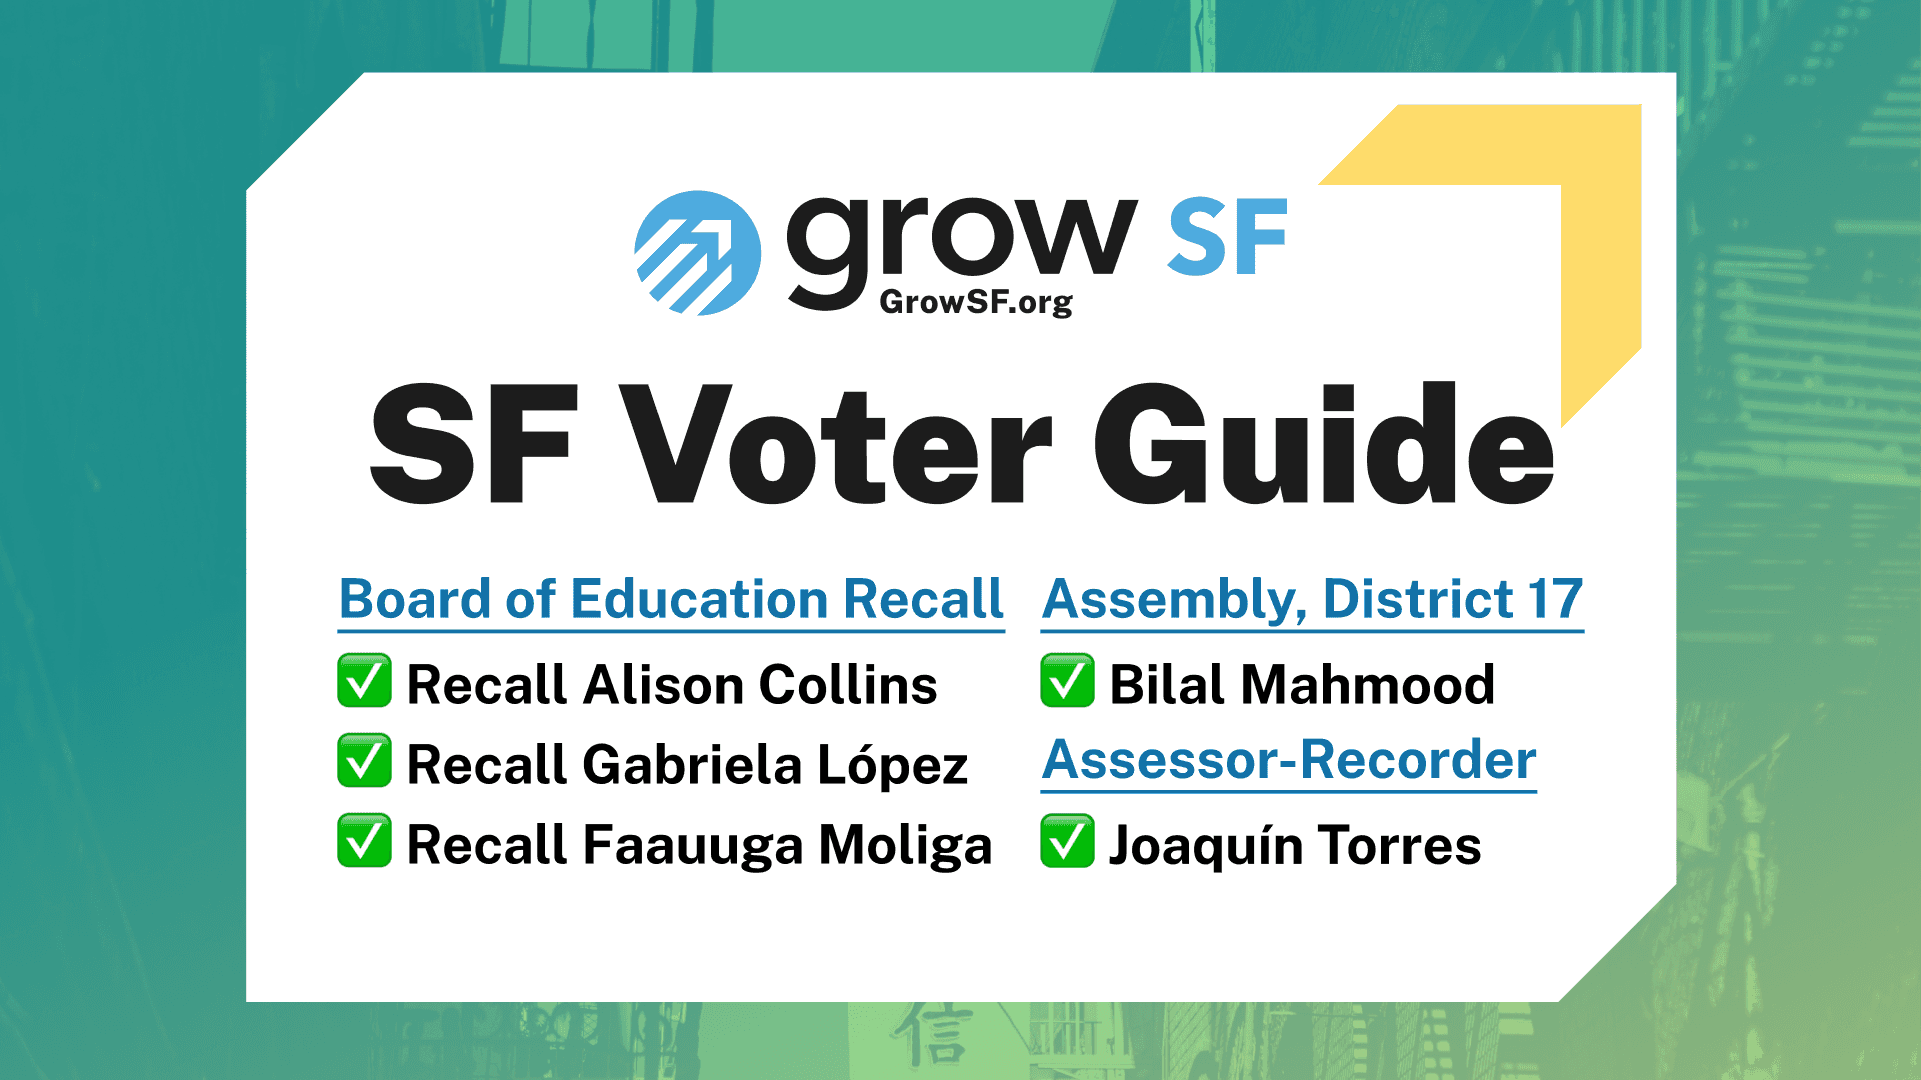 GrowSF San Francisco Voter Guide for the February 15, 2022 Special Election